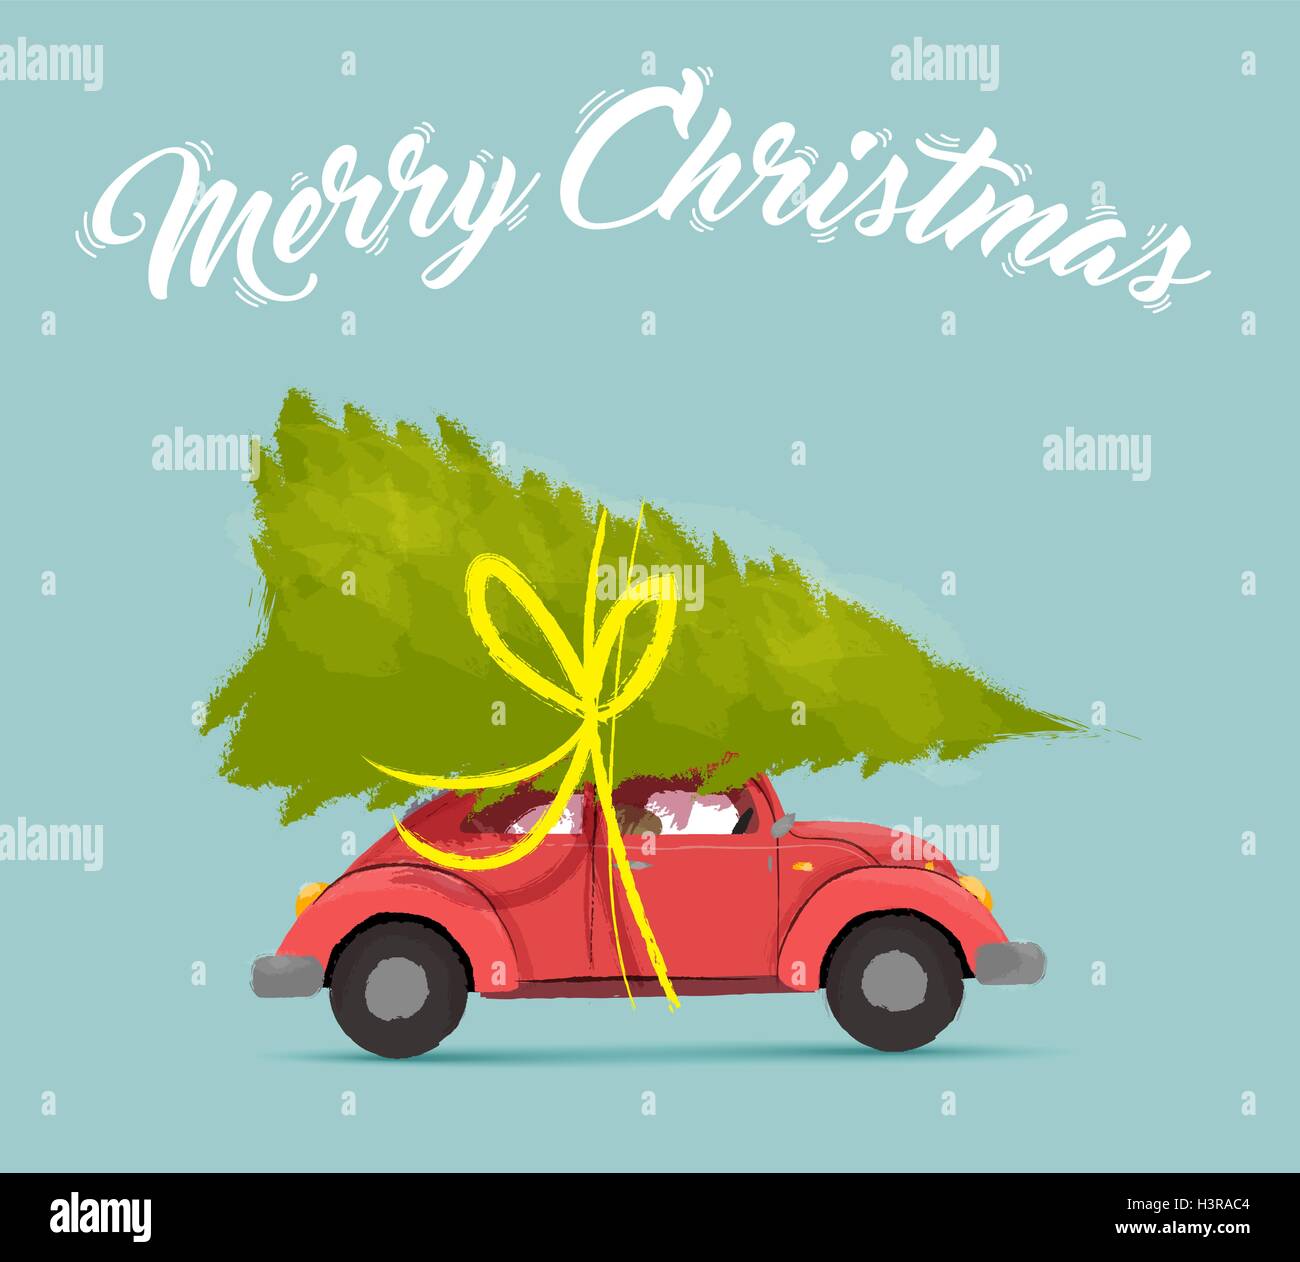 Merry christmas greeting card illustration of vintage red car with xmas pine tree gift on roof. EPS10 vector. Stock Vector